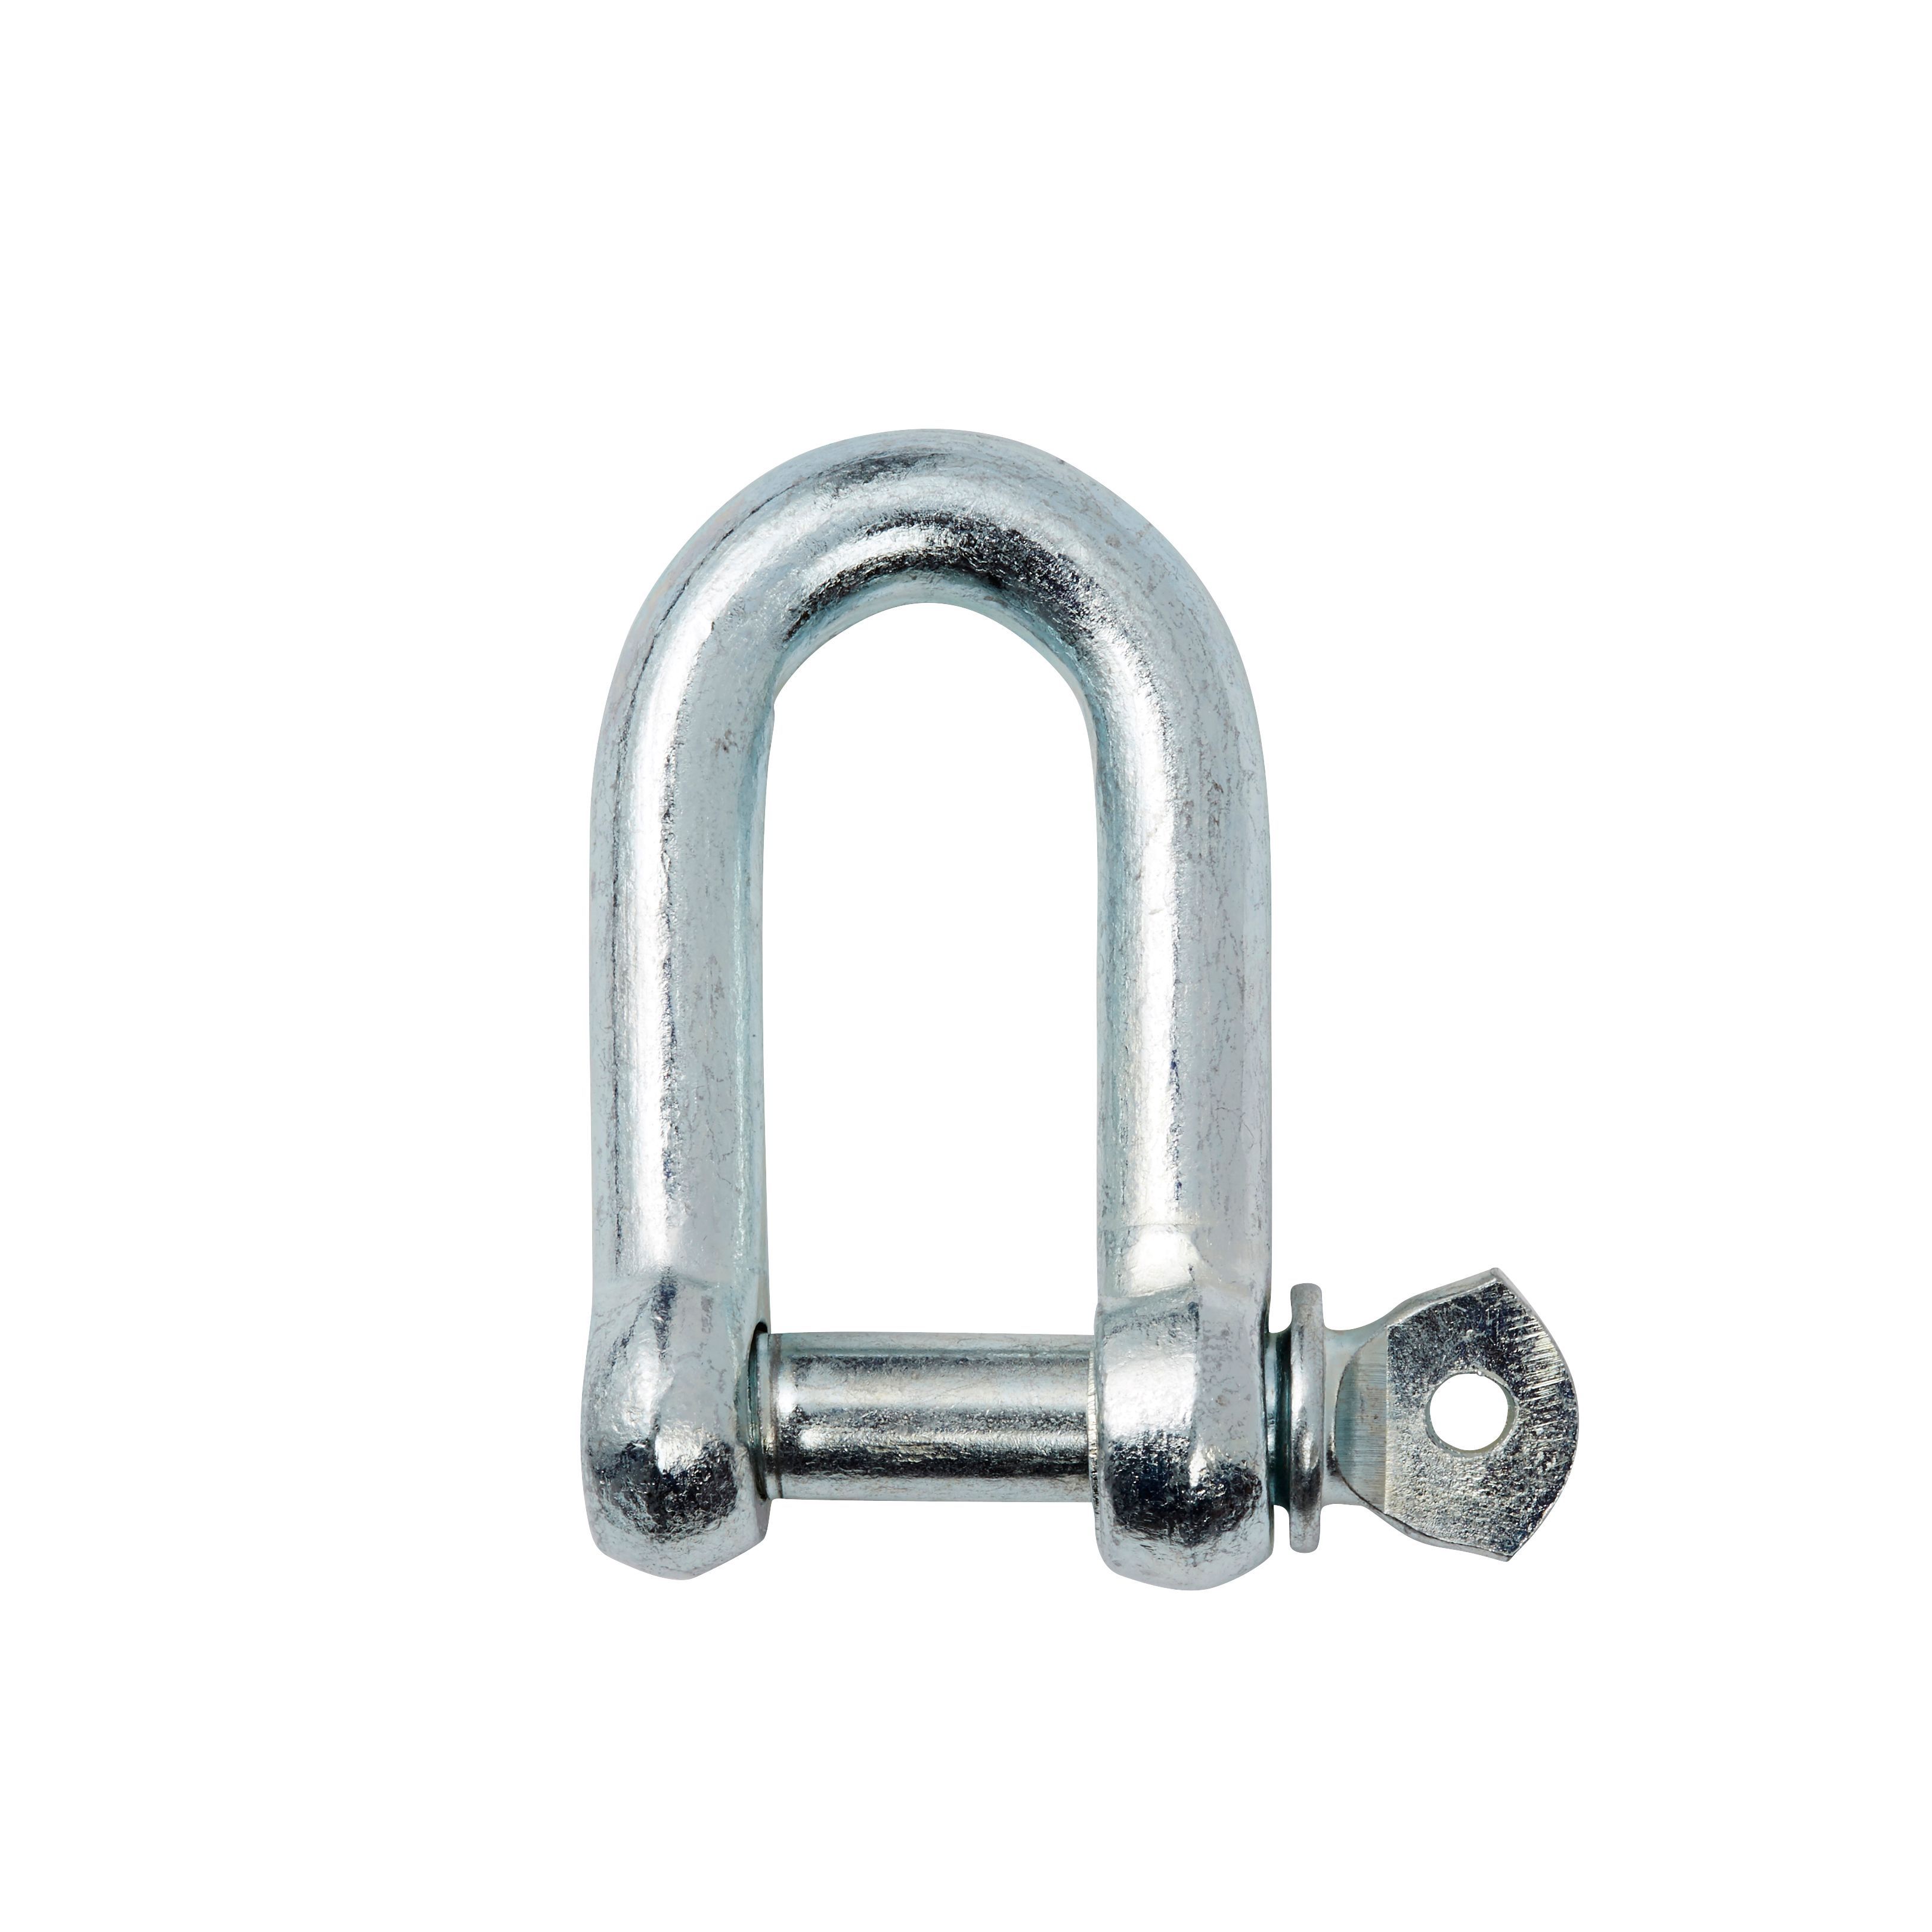 Diall Steel D-shackle (Dia)14mm